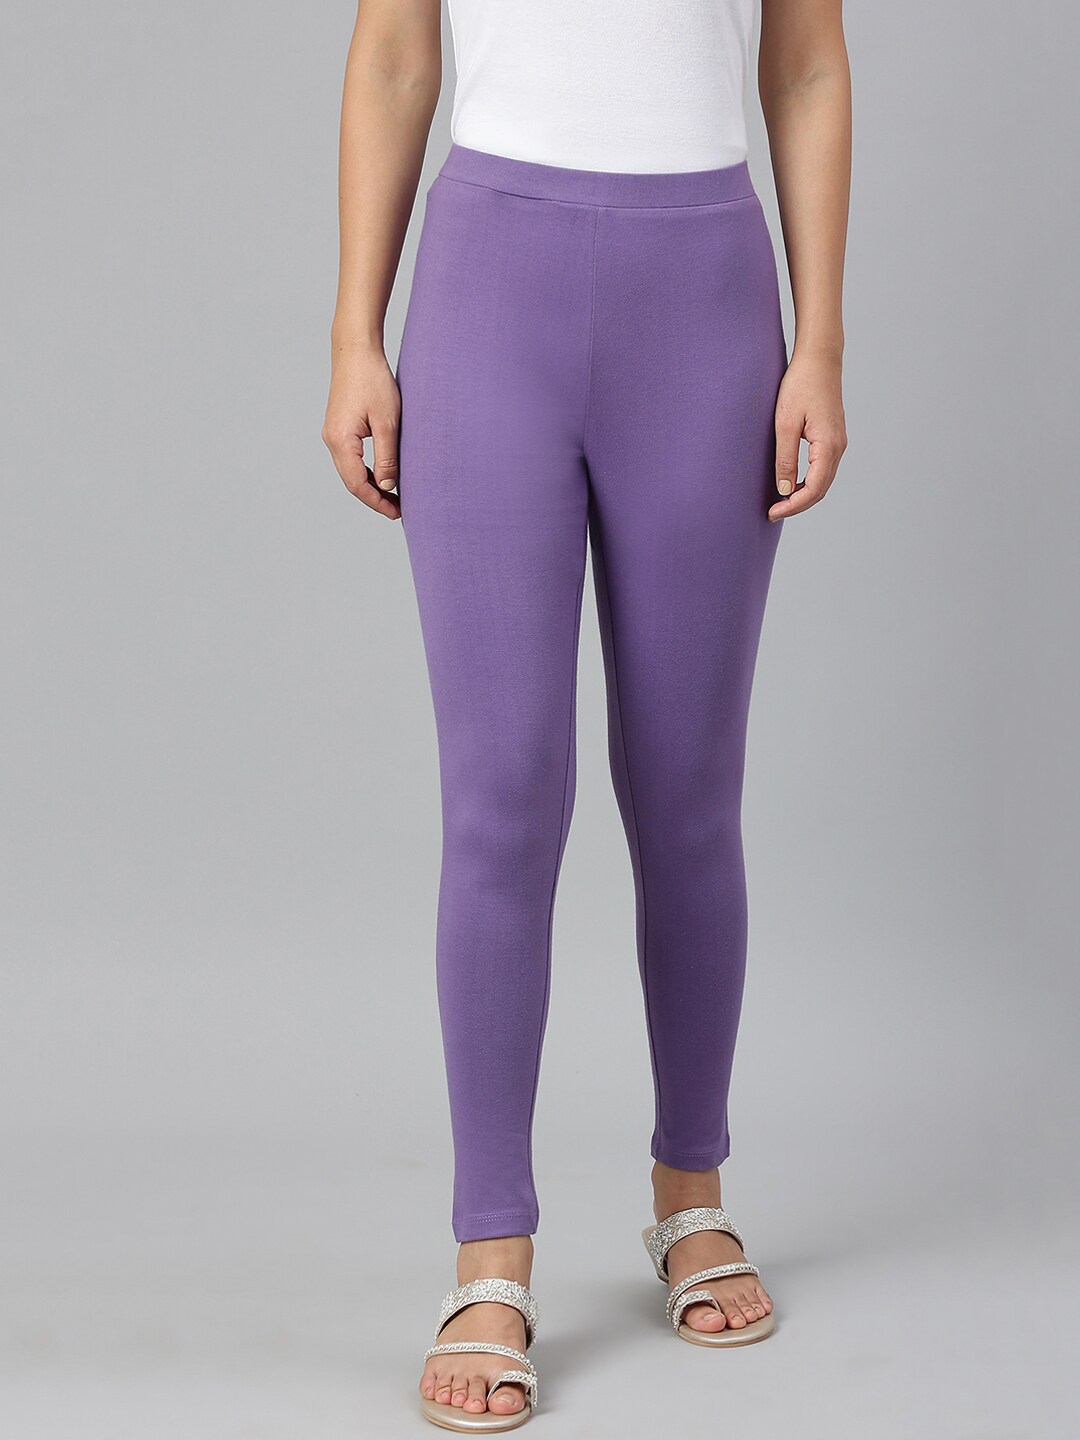 W Women Purple Solid Ankle-Length Leggings Price in India